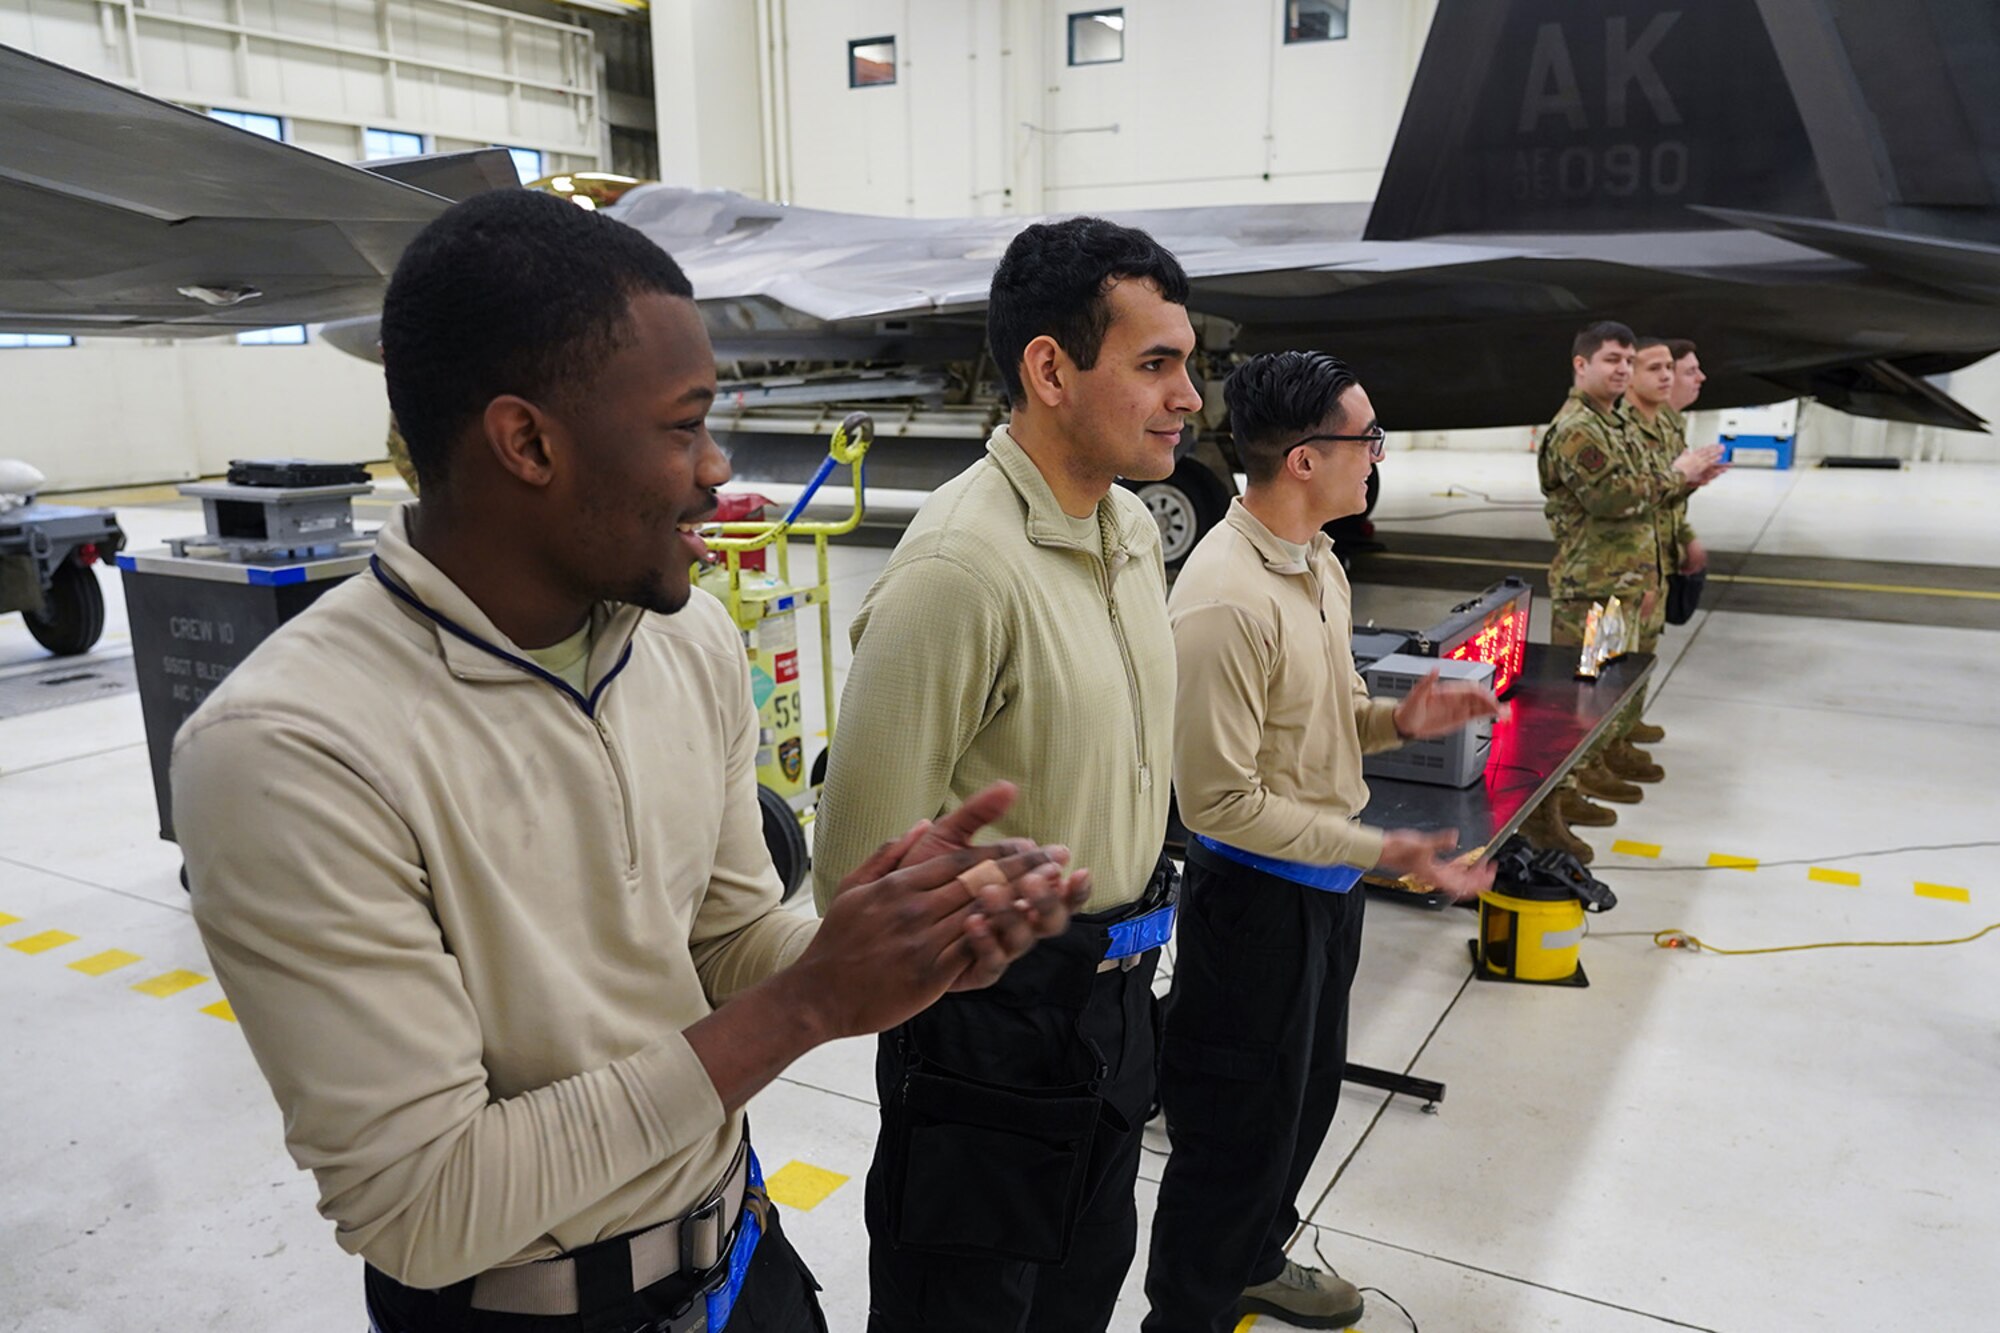 Airmen assigned to the 90th and 525th Aircraft Maintenance Units compete during a timed F-22 Raptor load crew competition on Joint Base Elmendorf-Richardson, Alaska, Jan. 31, 2020.